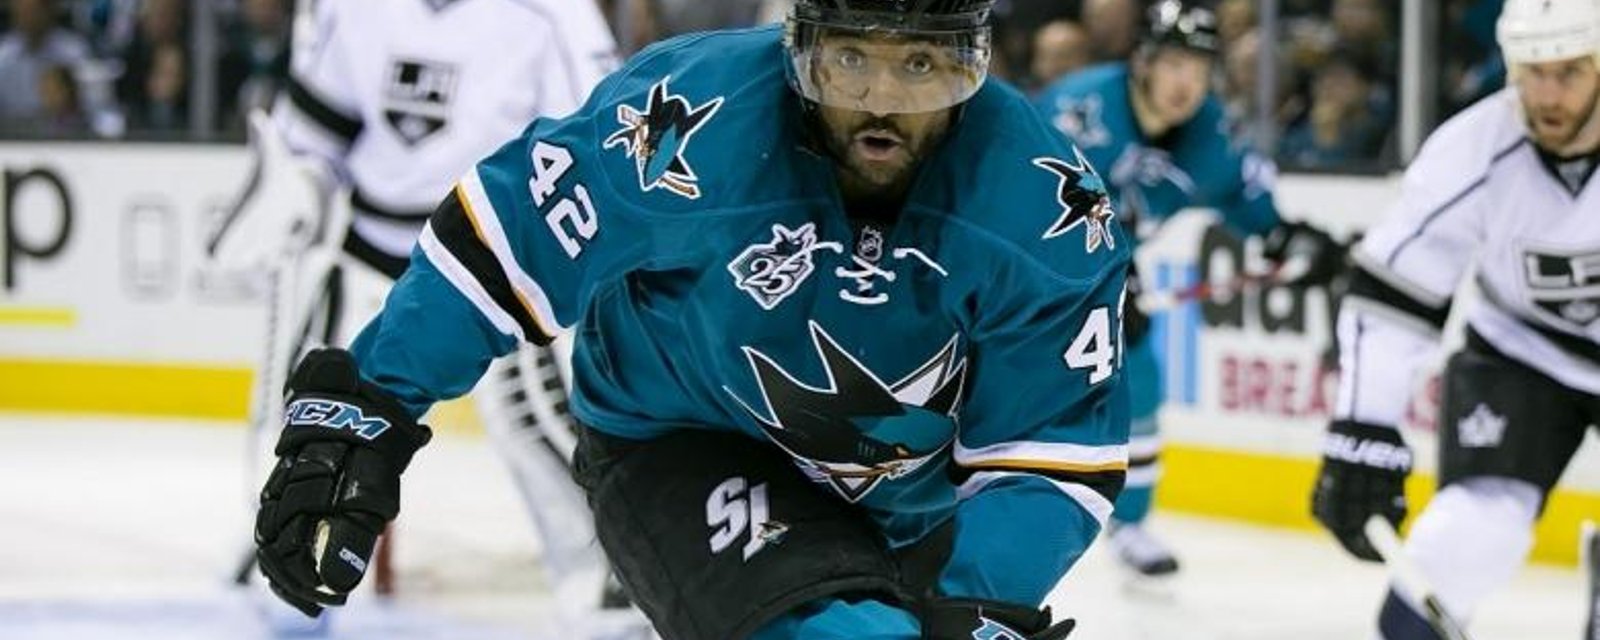 Player in the Cup Final wants the NHL to retire a number.